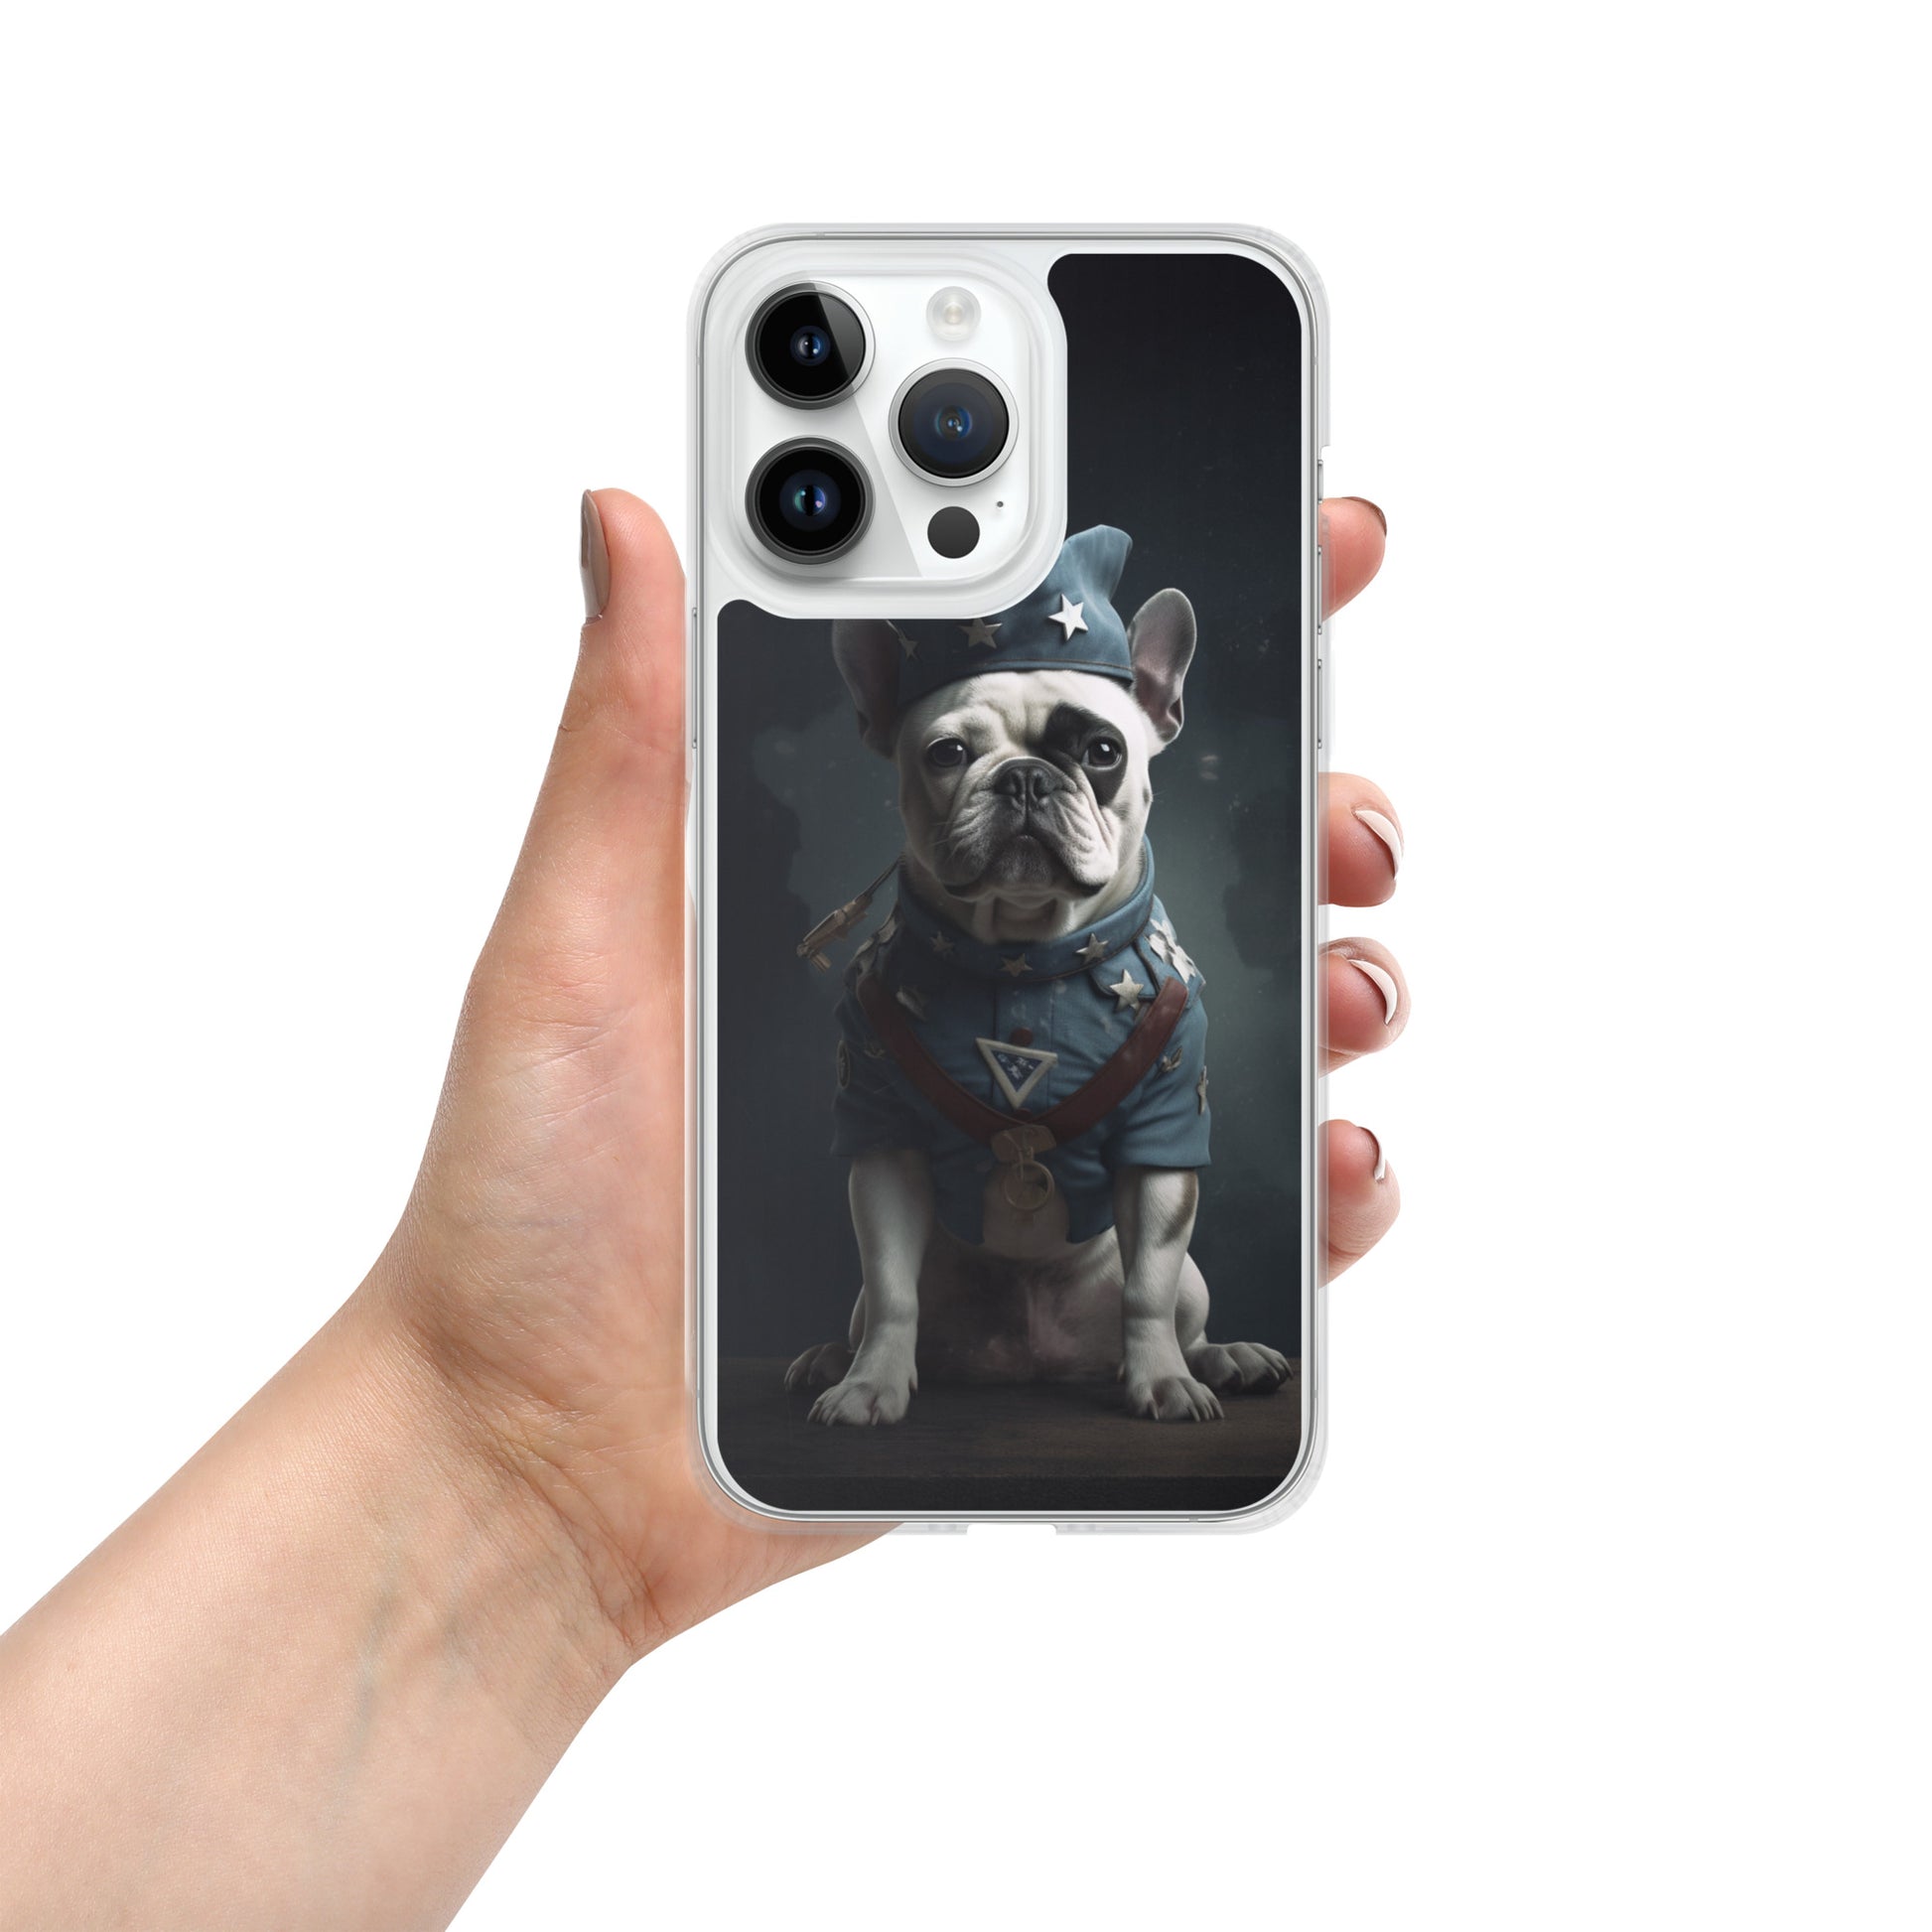 Frenchie iPhone Defender - Bold & Smart Phone Guard